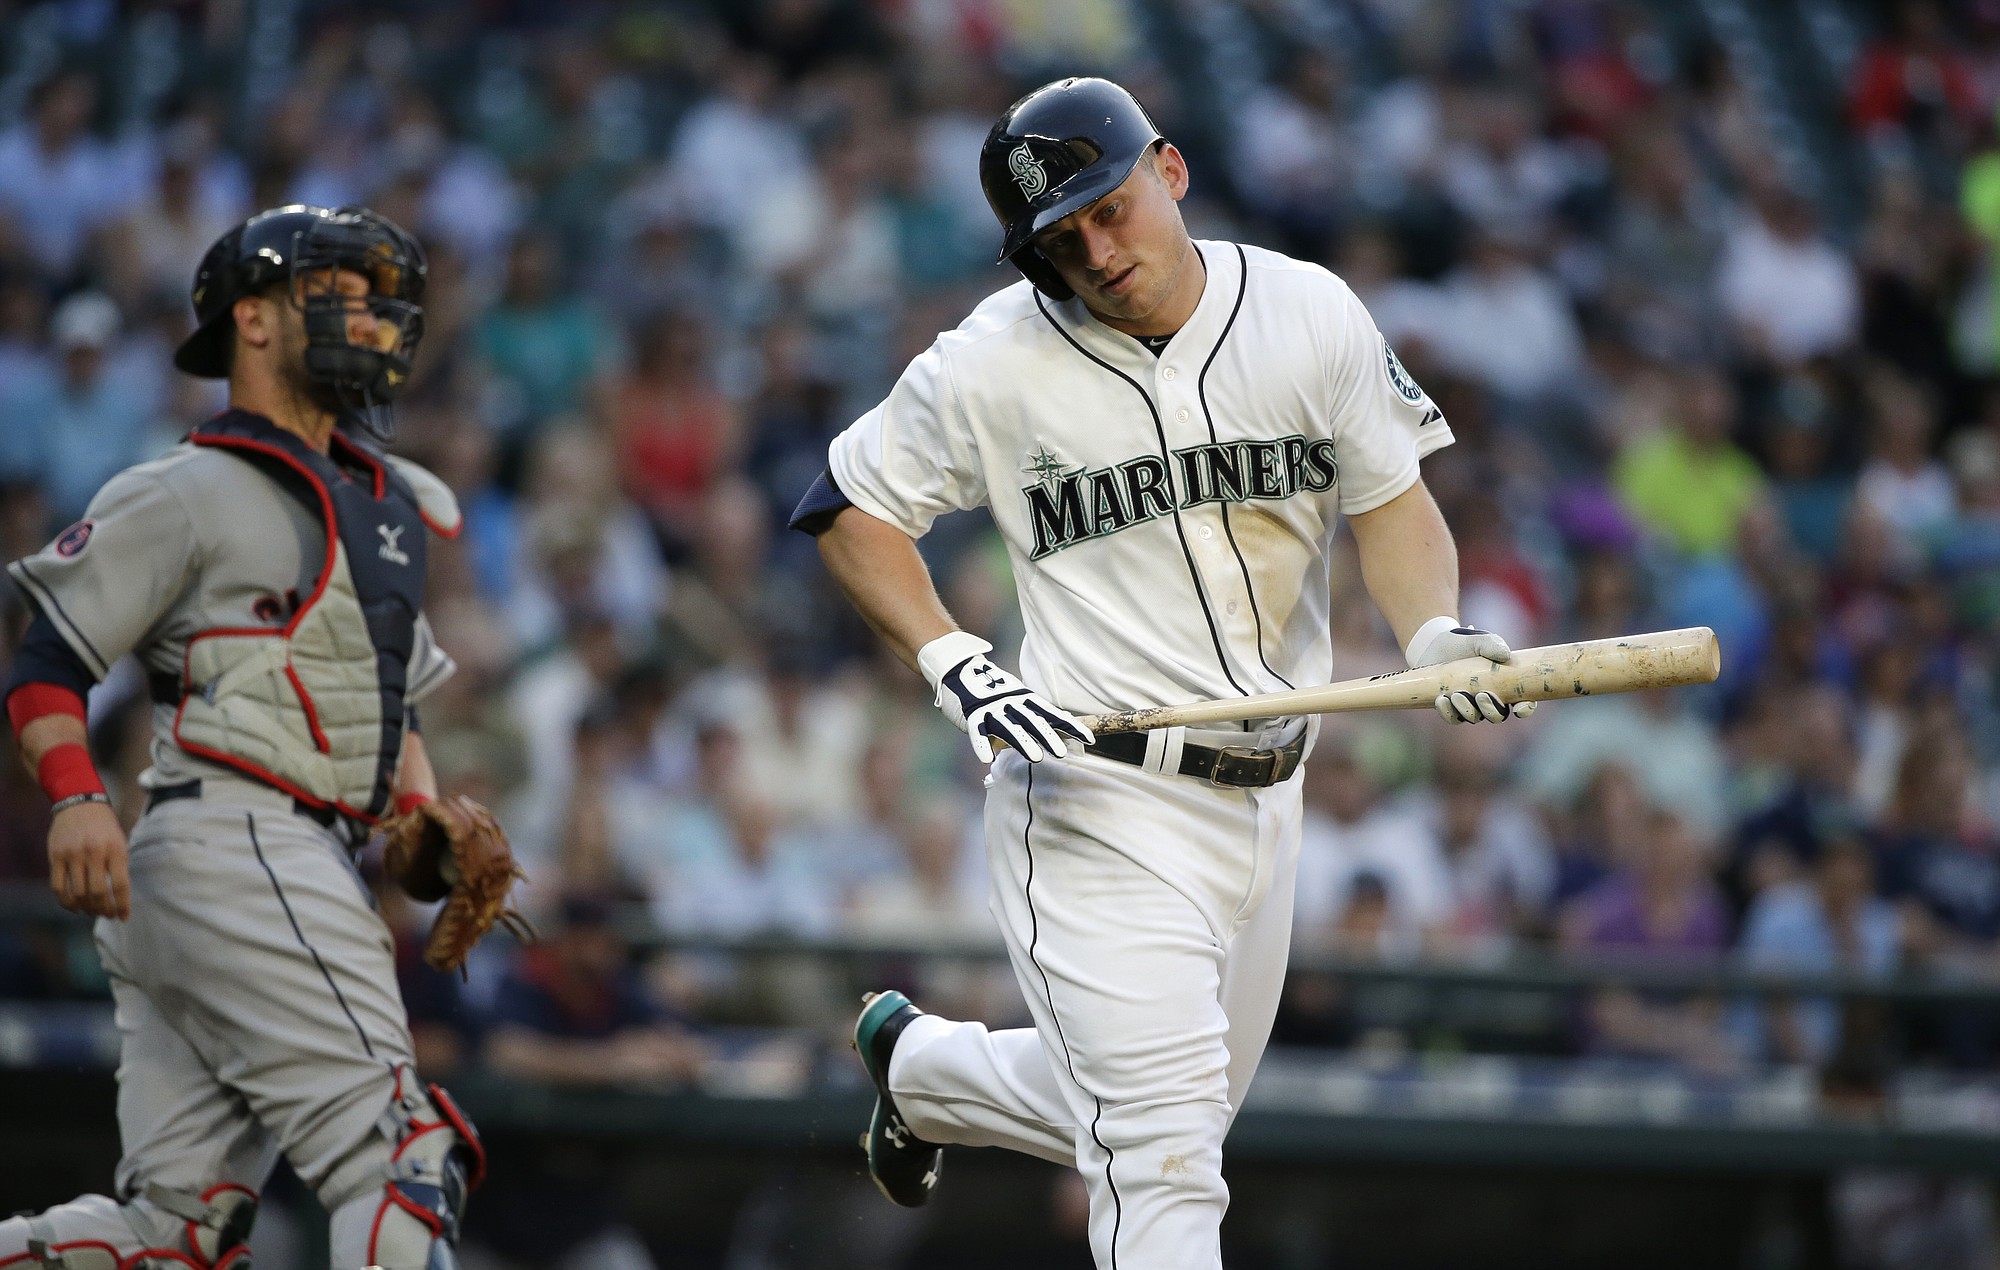 Seattle Mariners' Kyle Seager spins around after striking out to end the third inning against the Cleveland Indians on Thursday, May 28, 2015, in Seattle.